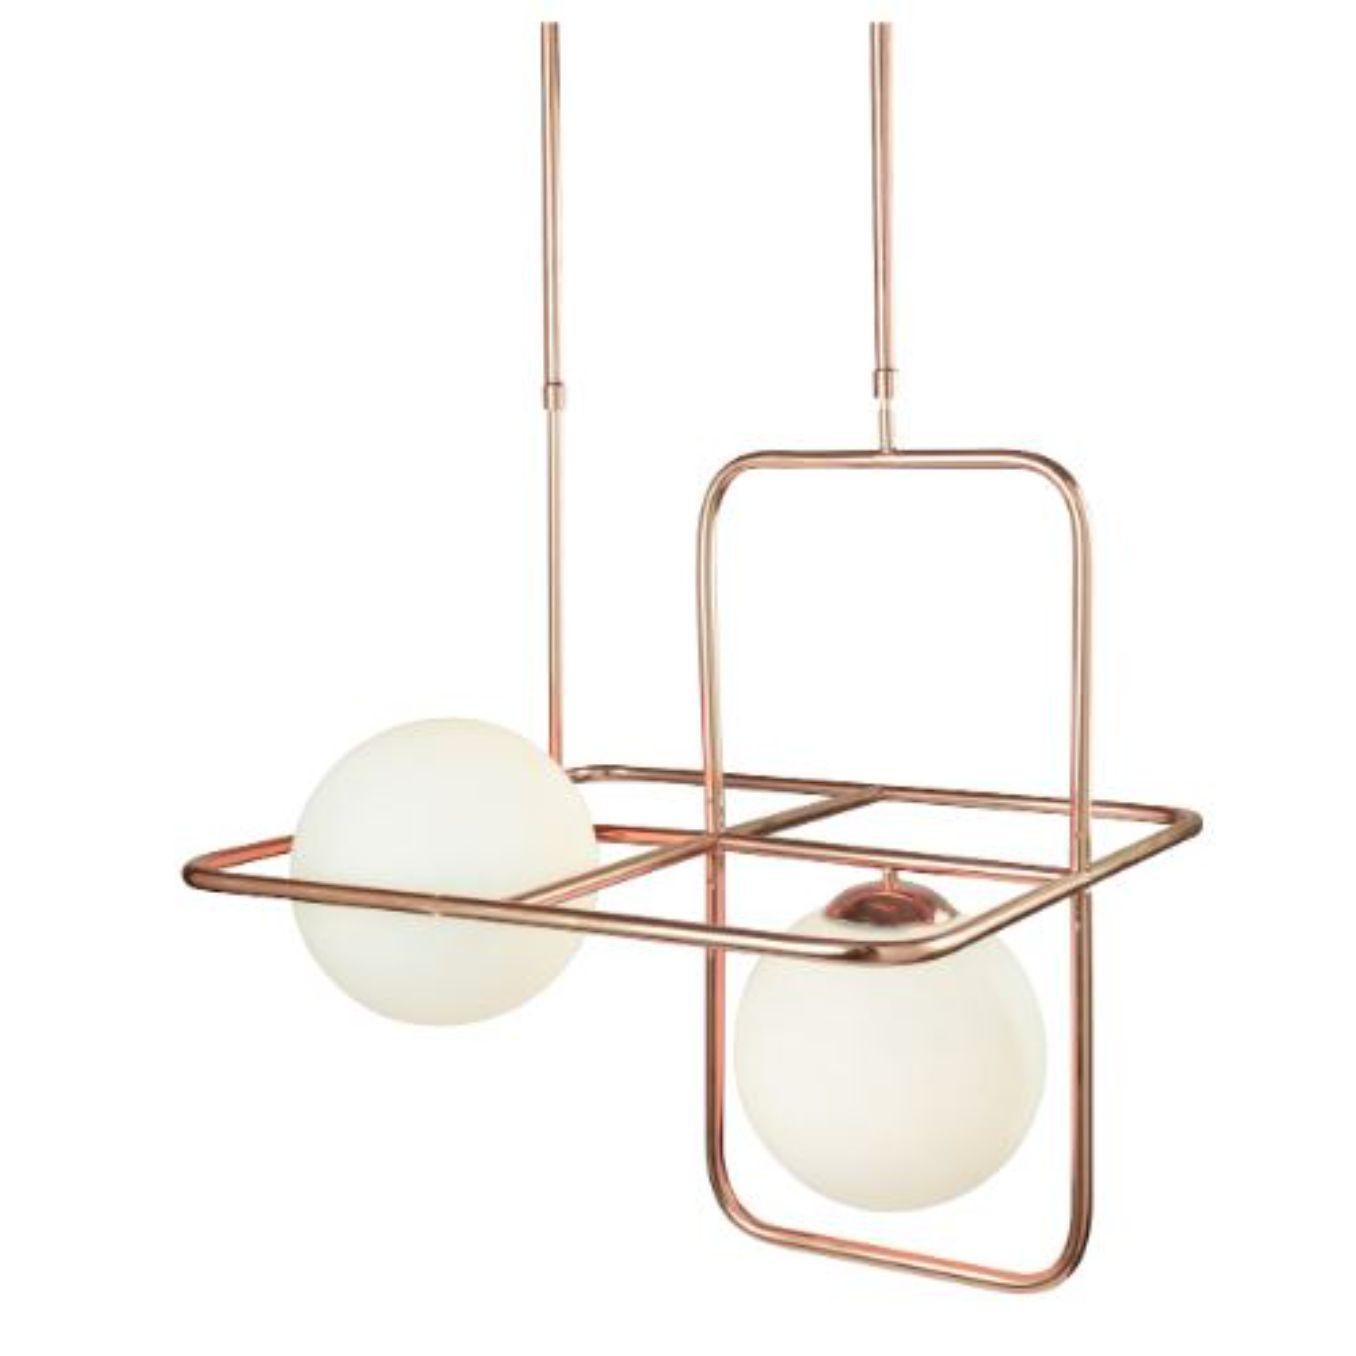 Copper link III suspension lamp by Dooq.
Dimensions: W 64 x D 64 x H 64 cm.
Materials: lacquered metal, polished or brushed metal, copper.
Also available in different colours and materials.

Information:
230V/50Hz
2 x max. G9
5W